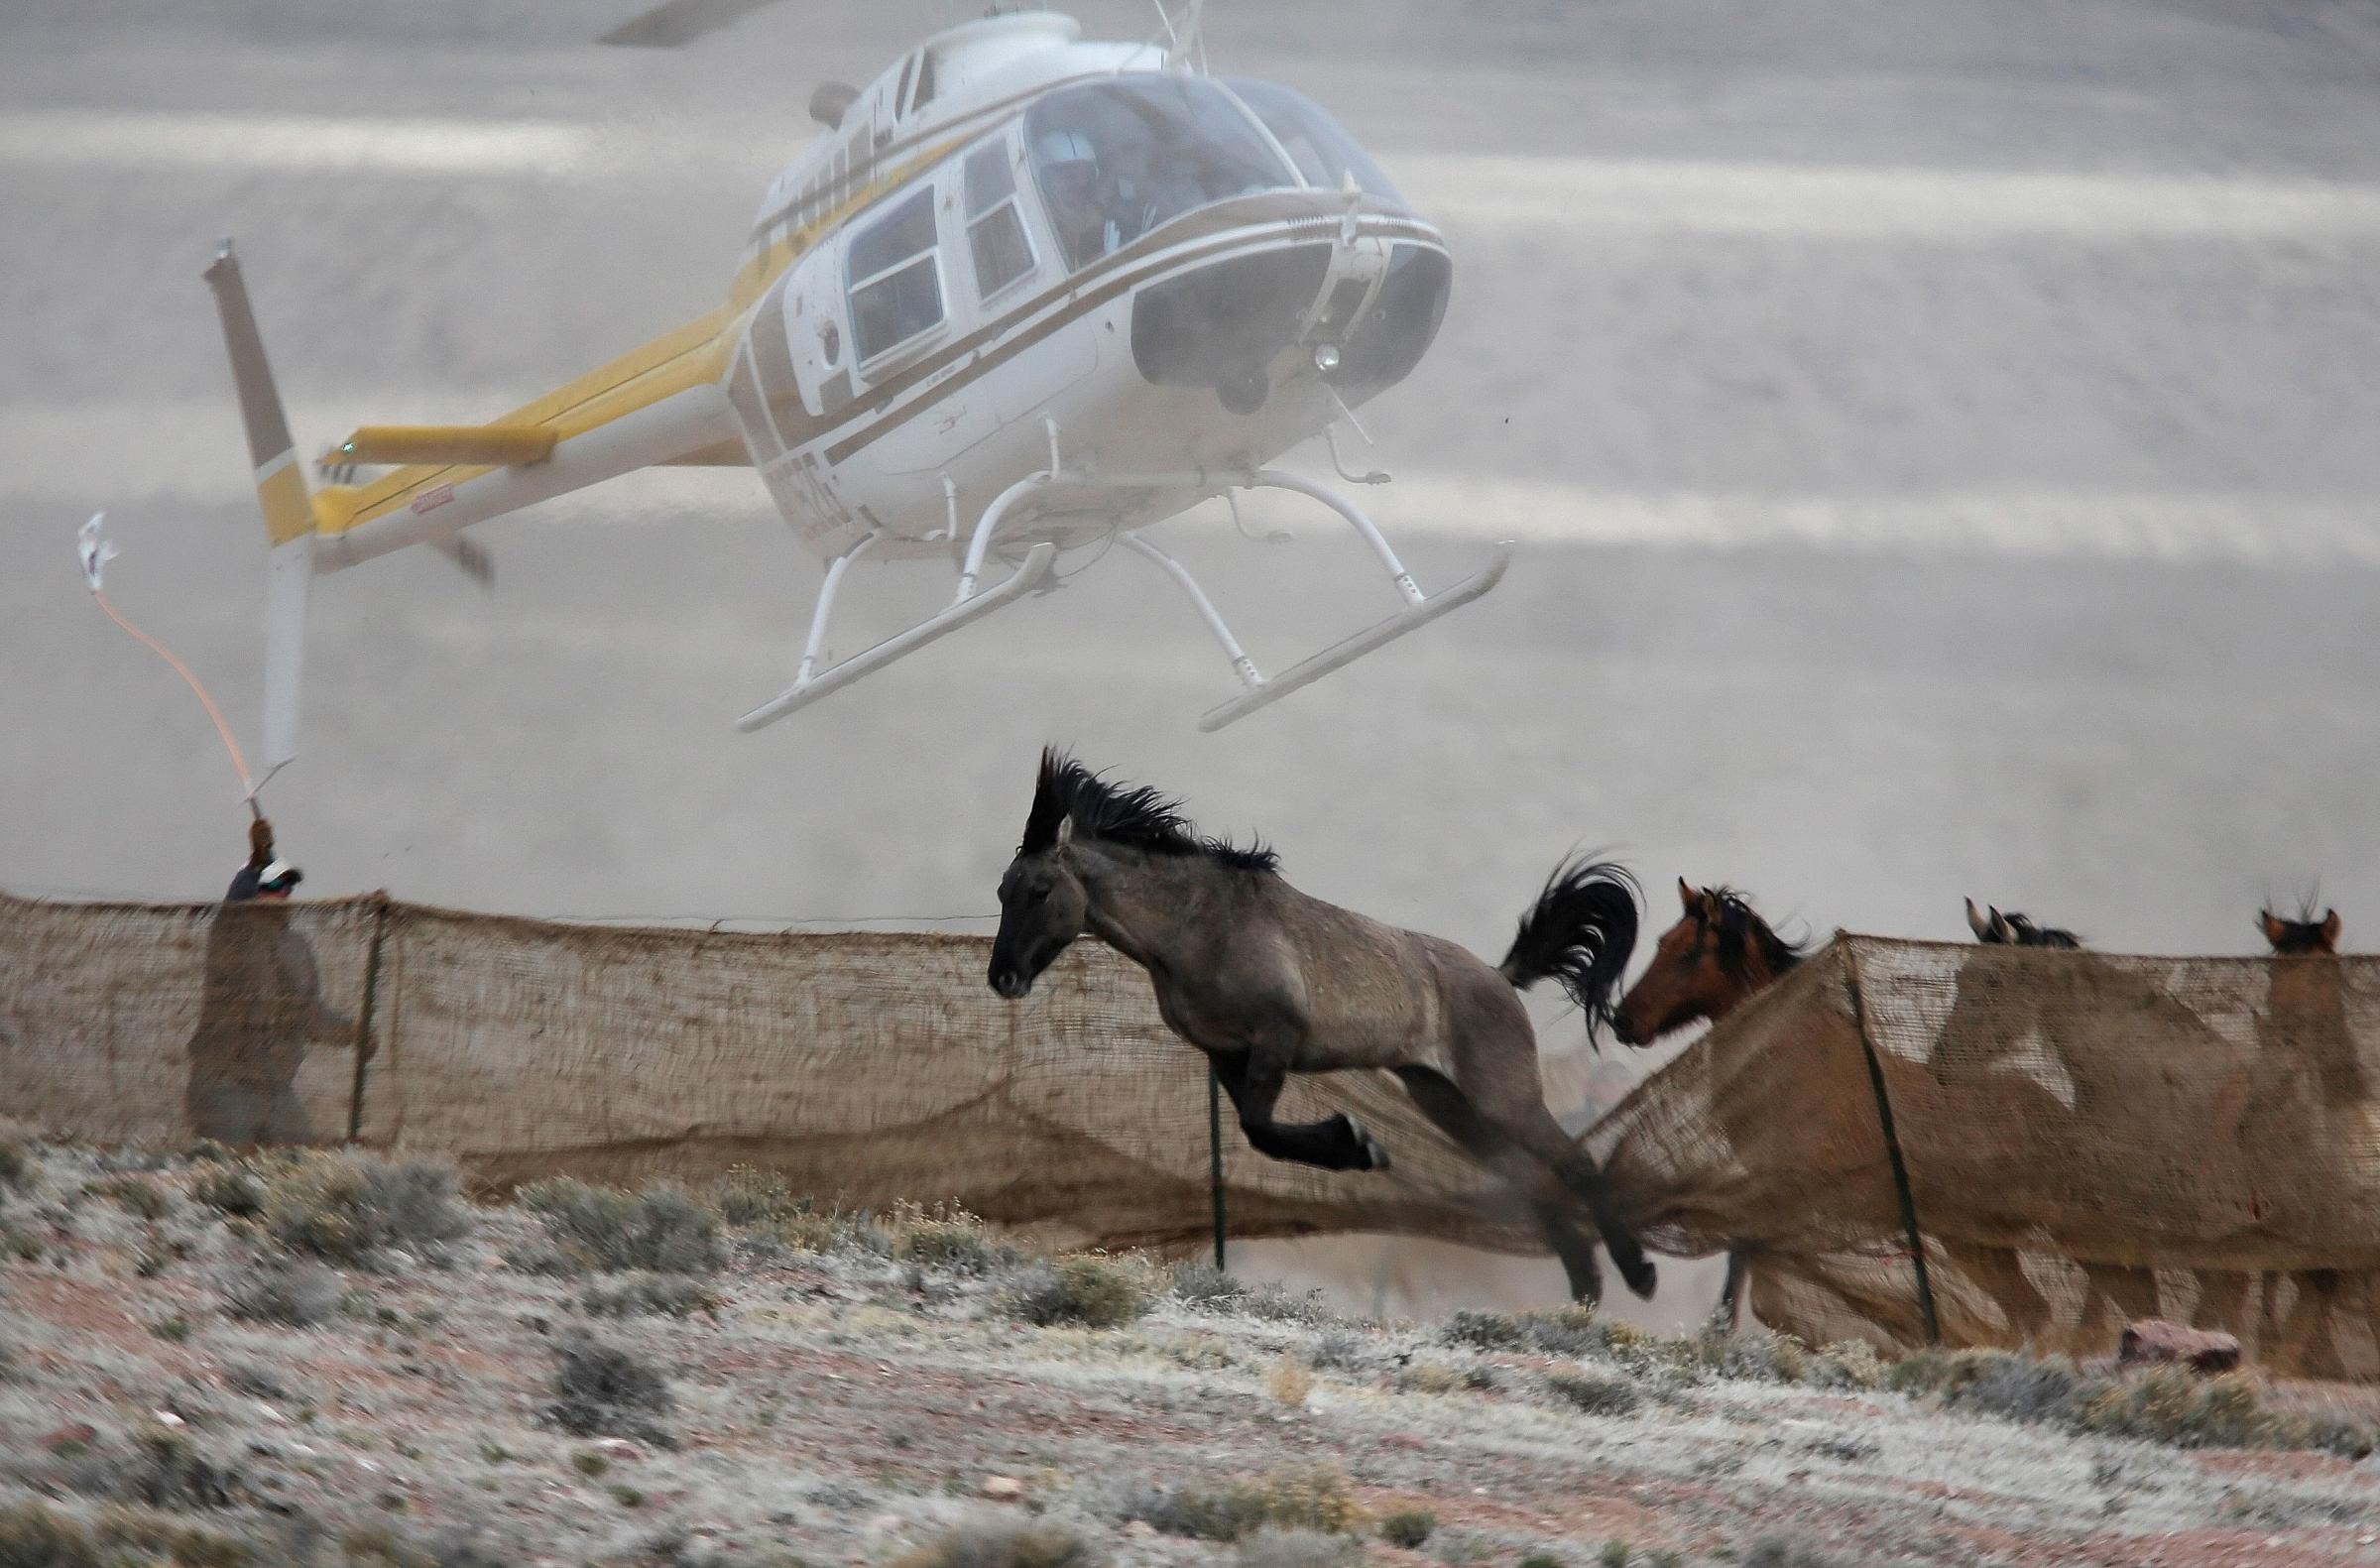 Several wild horses escape as a helicopter is used by the Bureau of Land Management to gather wild horses into a trap along Highway 21 near the Sulphur Herd Management Area south of Garrison, Utah, on Feb. 26, 2015.